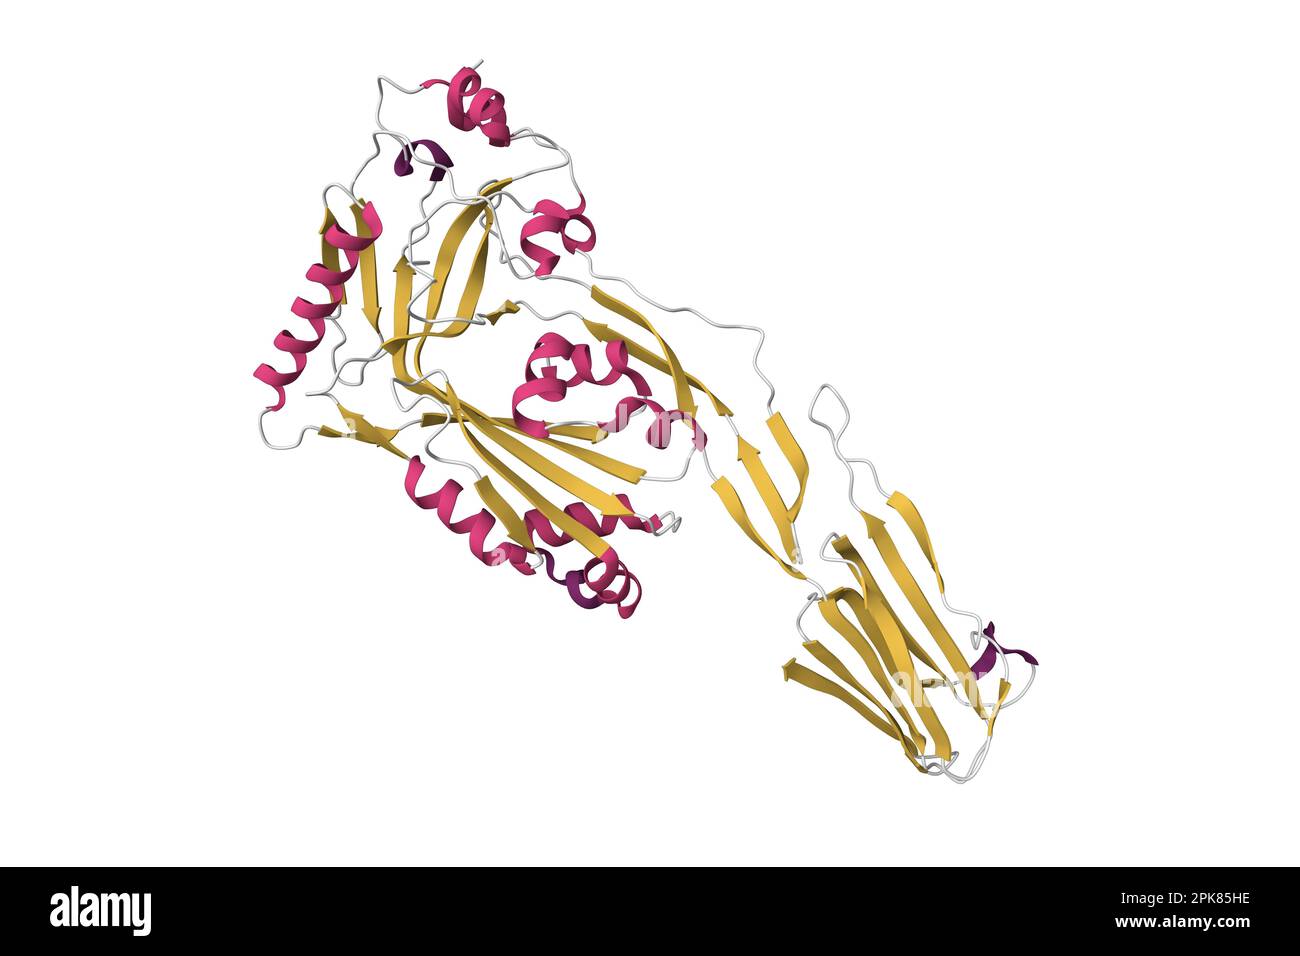 Structure of perfringolysin O. 3D cartoon model, secondary structure color scheme, PDB 1m3i, white background Stock Photo